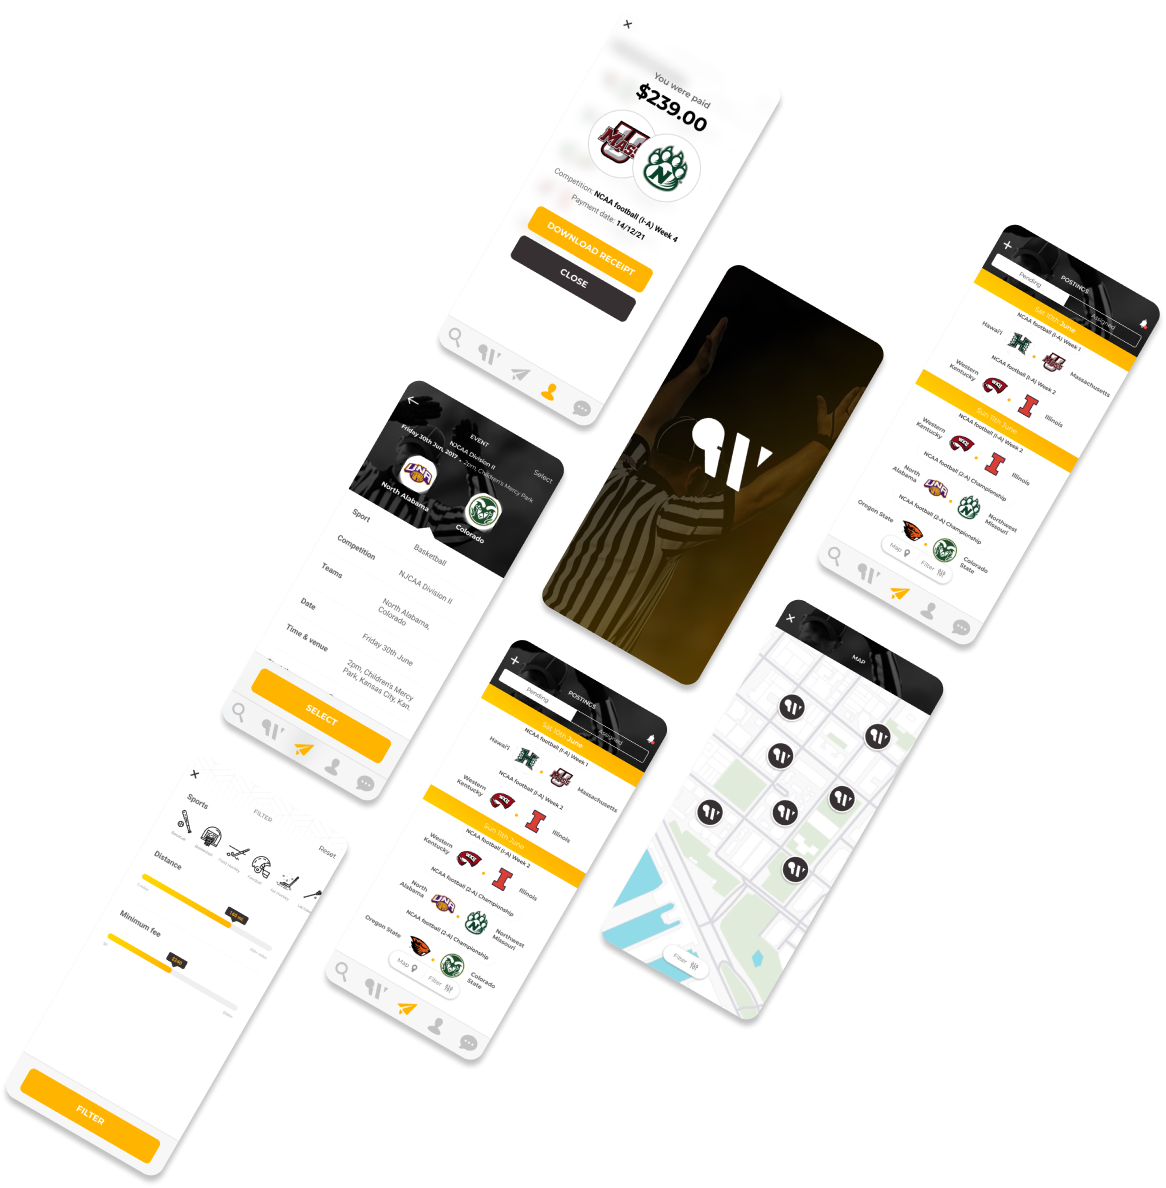 Imahes of Whistle app for case study page